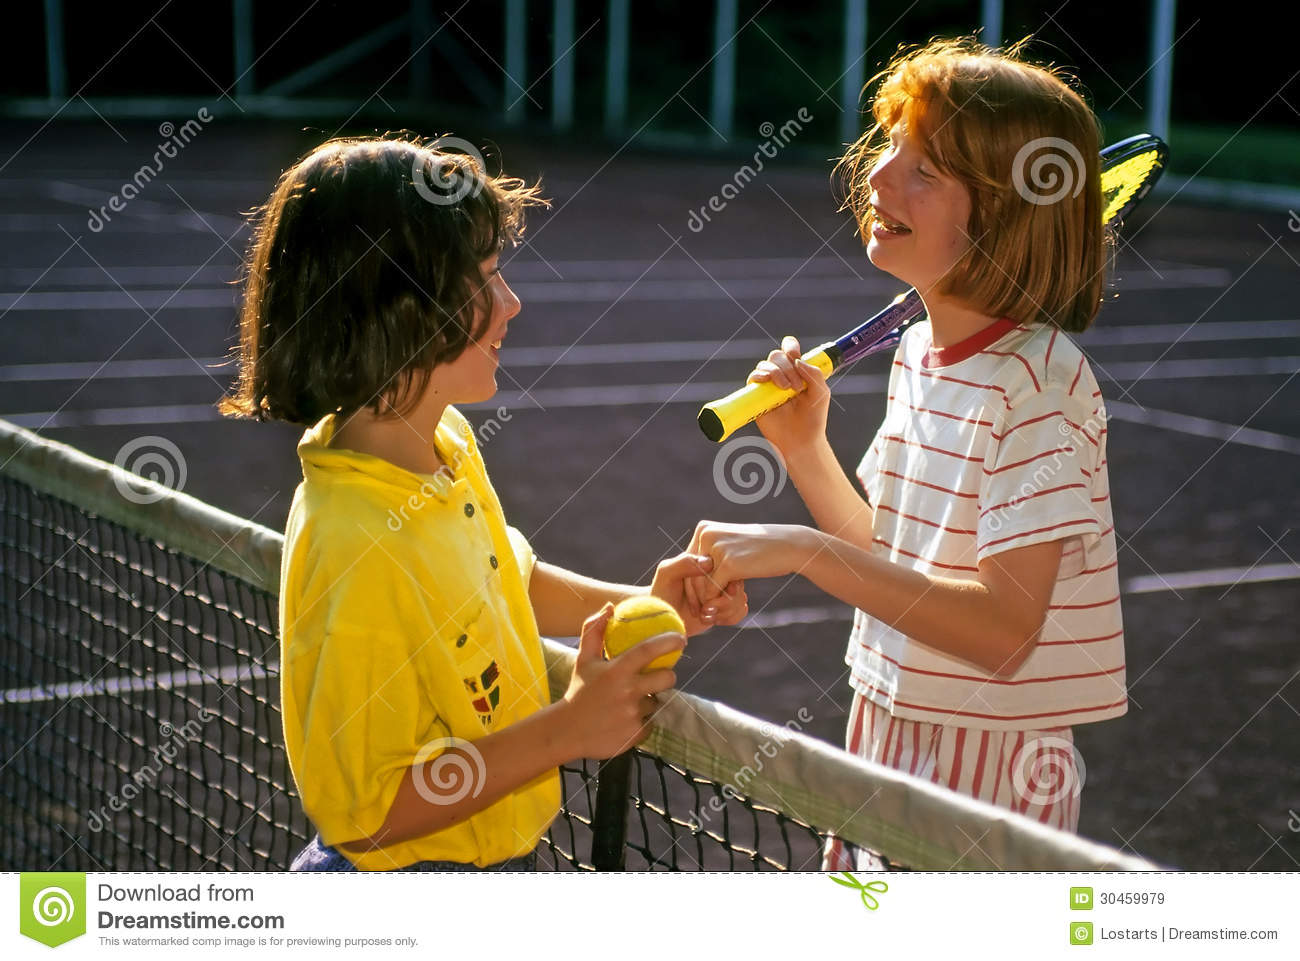 Two Girls At Summer Camp Demonstrate Good Sportsmanship After Their